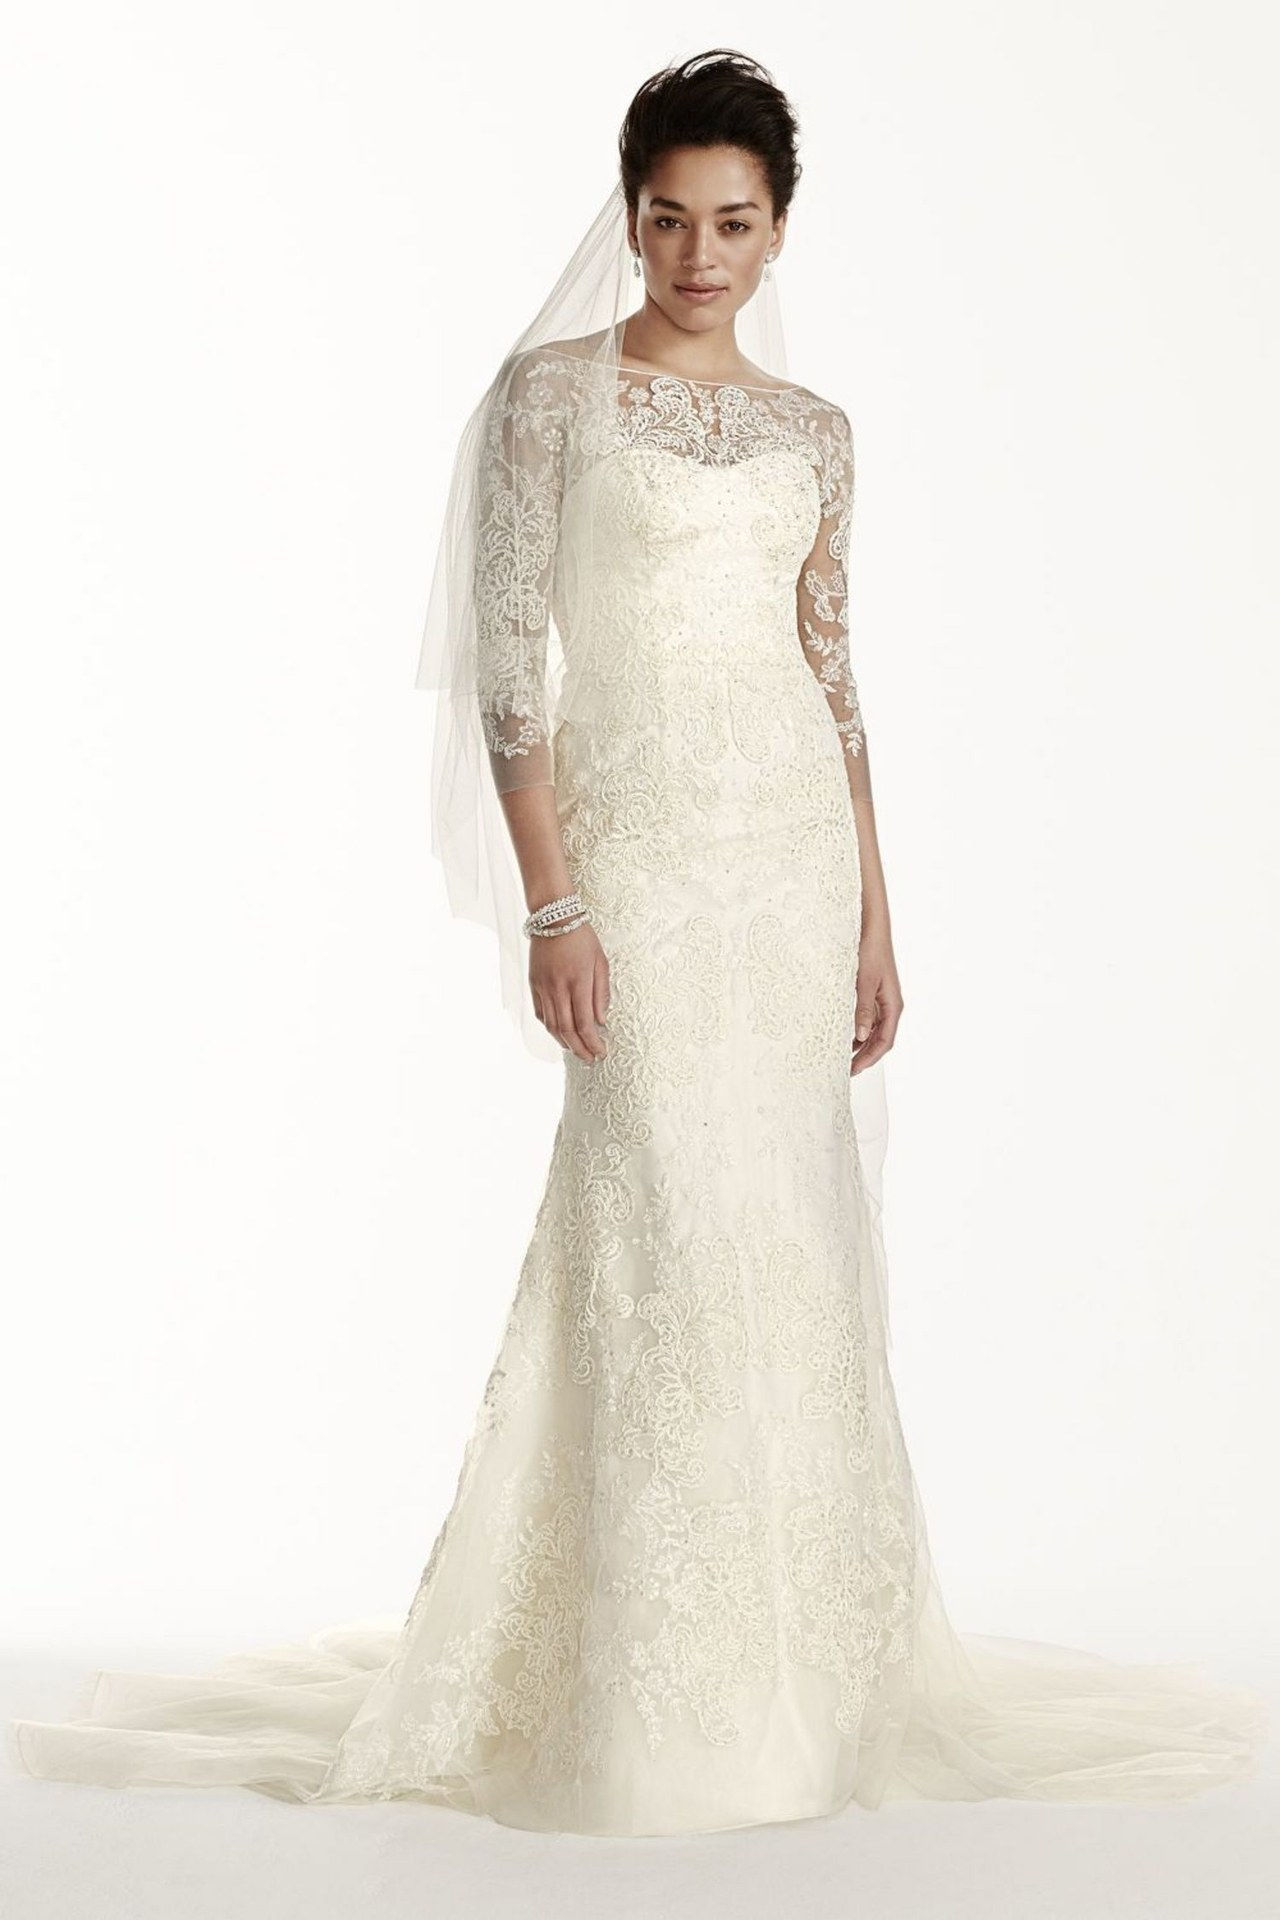 20 wedding dresses with sleeves 1001 courtesy